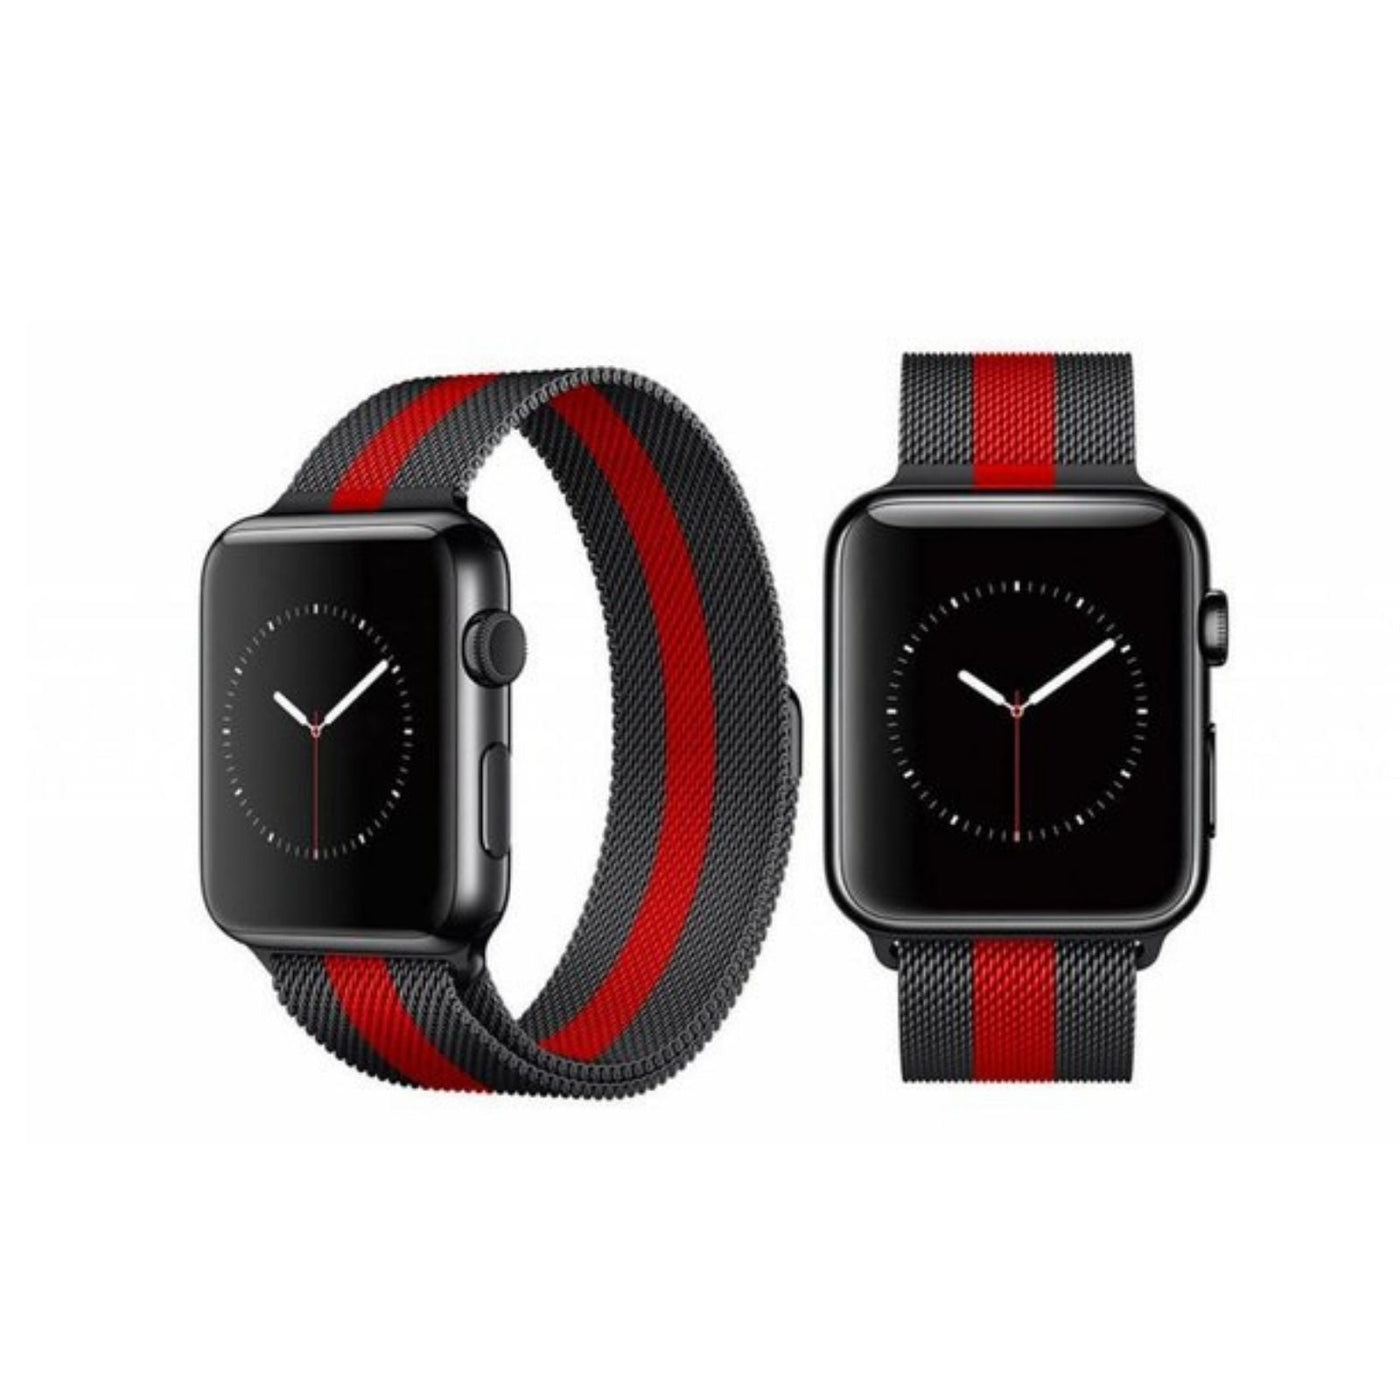 ALK Classic Milanese Band for Apple Watch in Black Red - Alk Designs